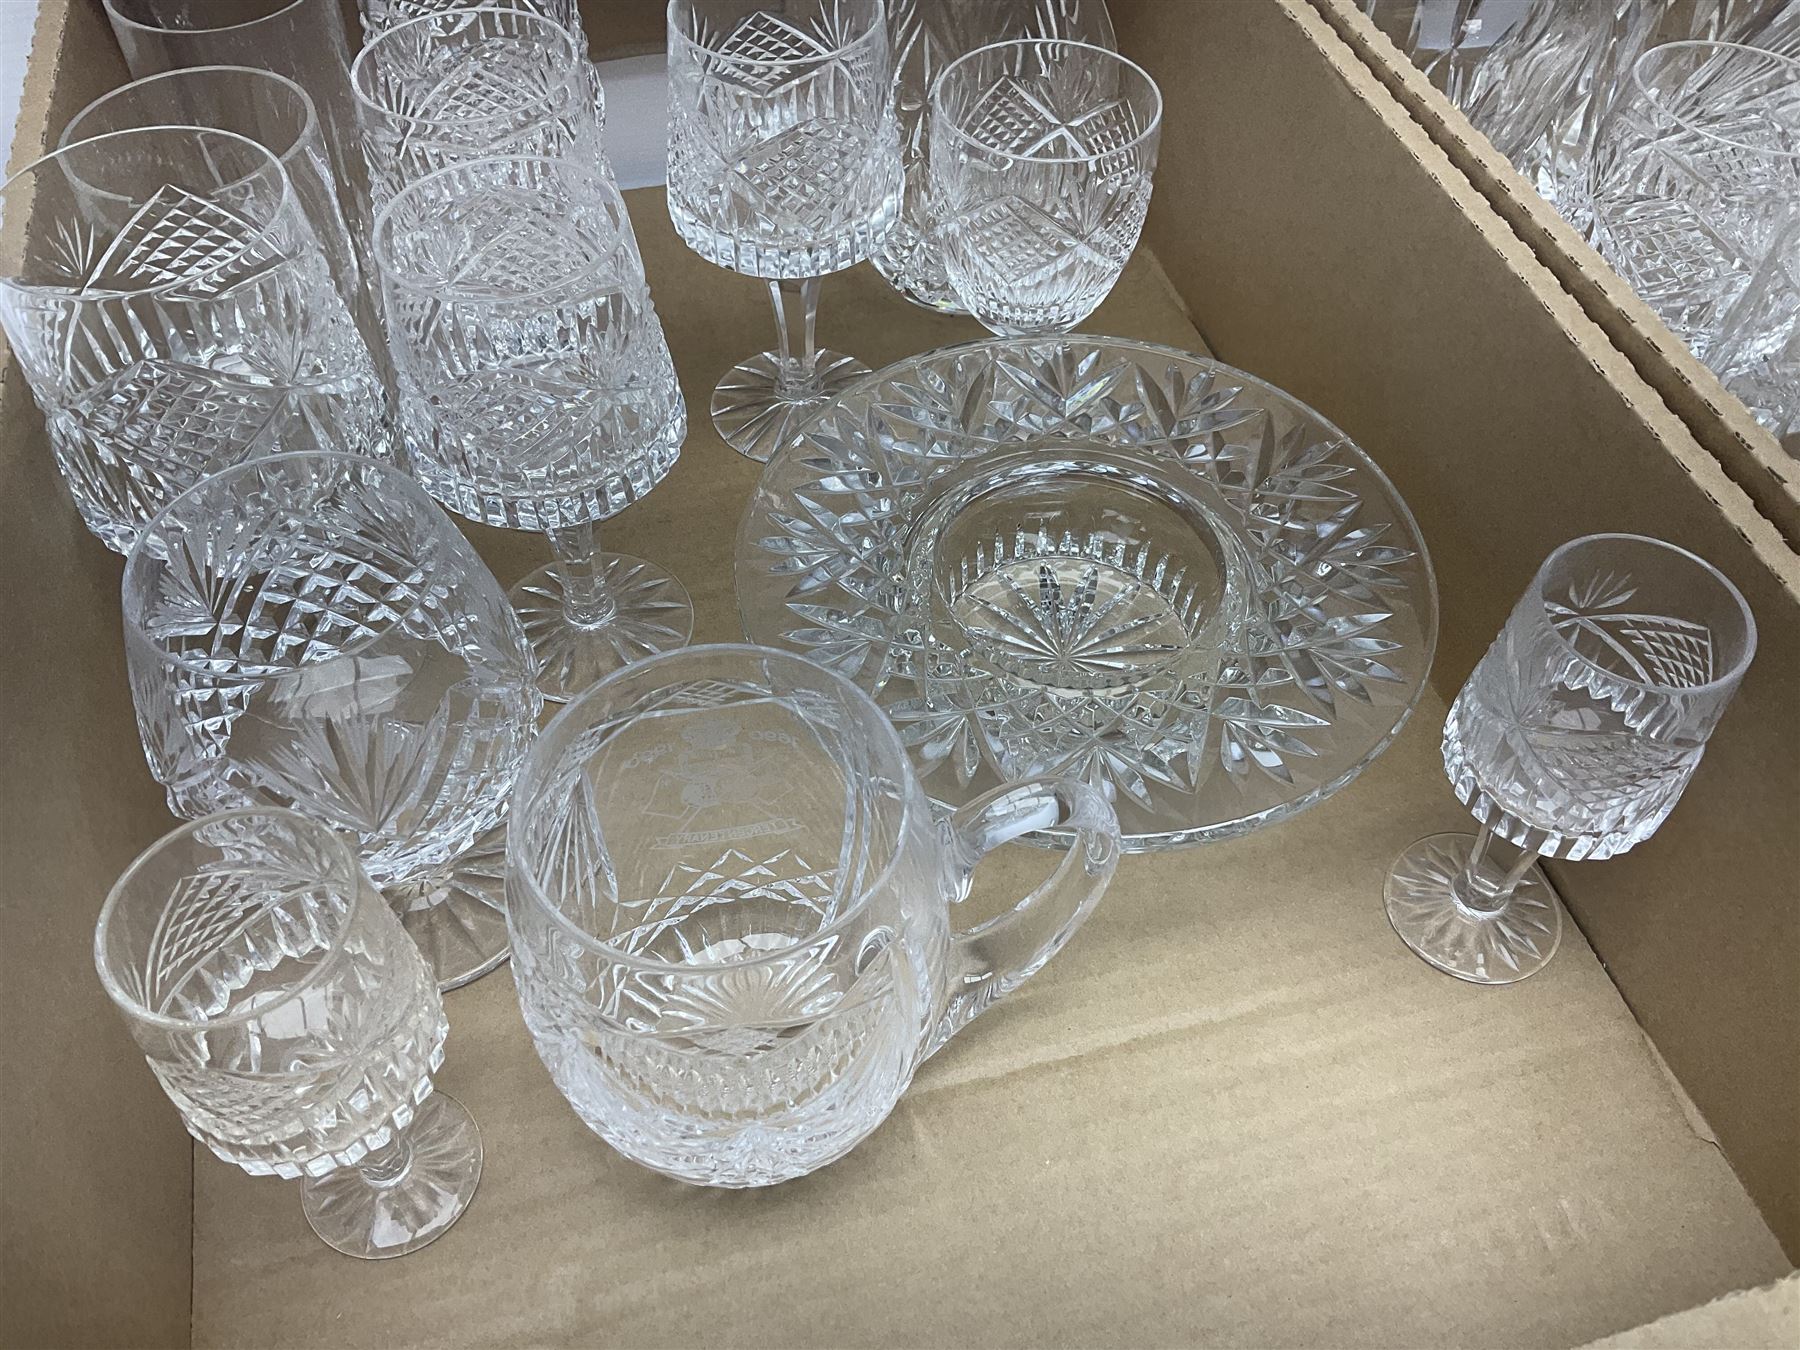 Collection of Waterford and Tyrone crystal - Image 2 of 9